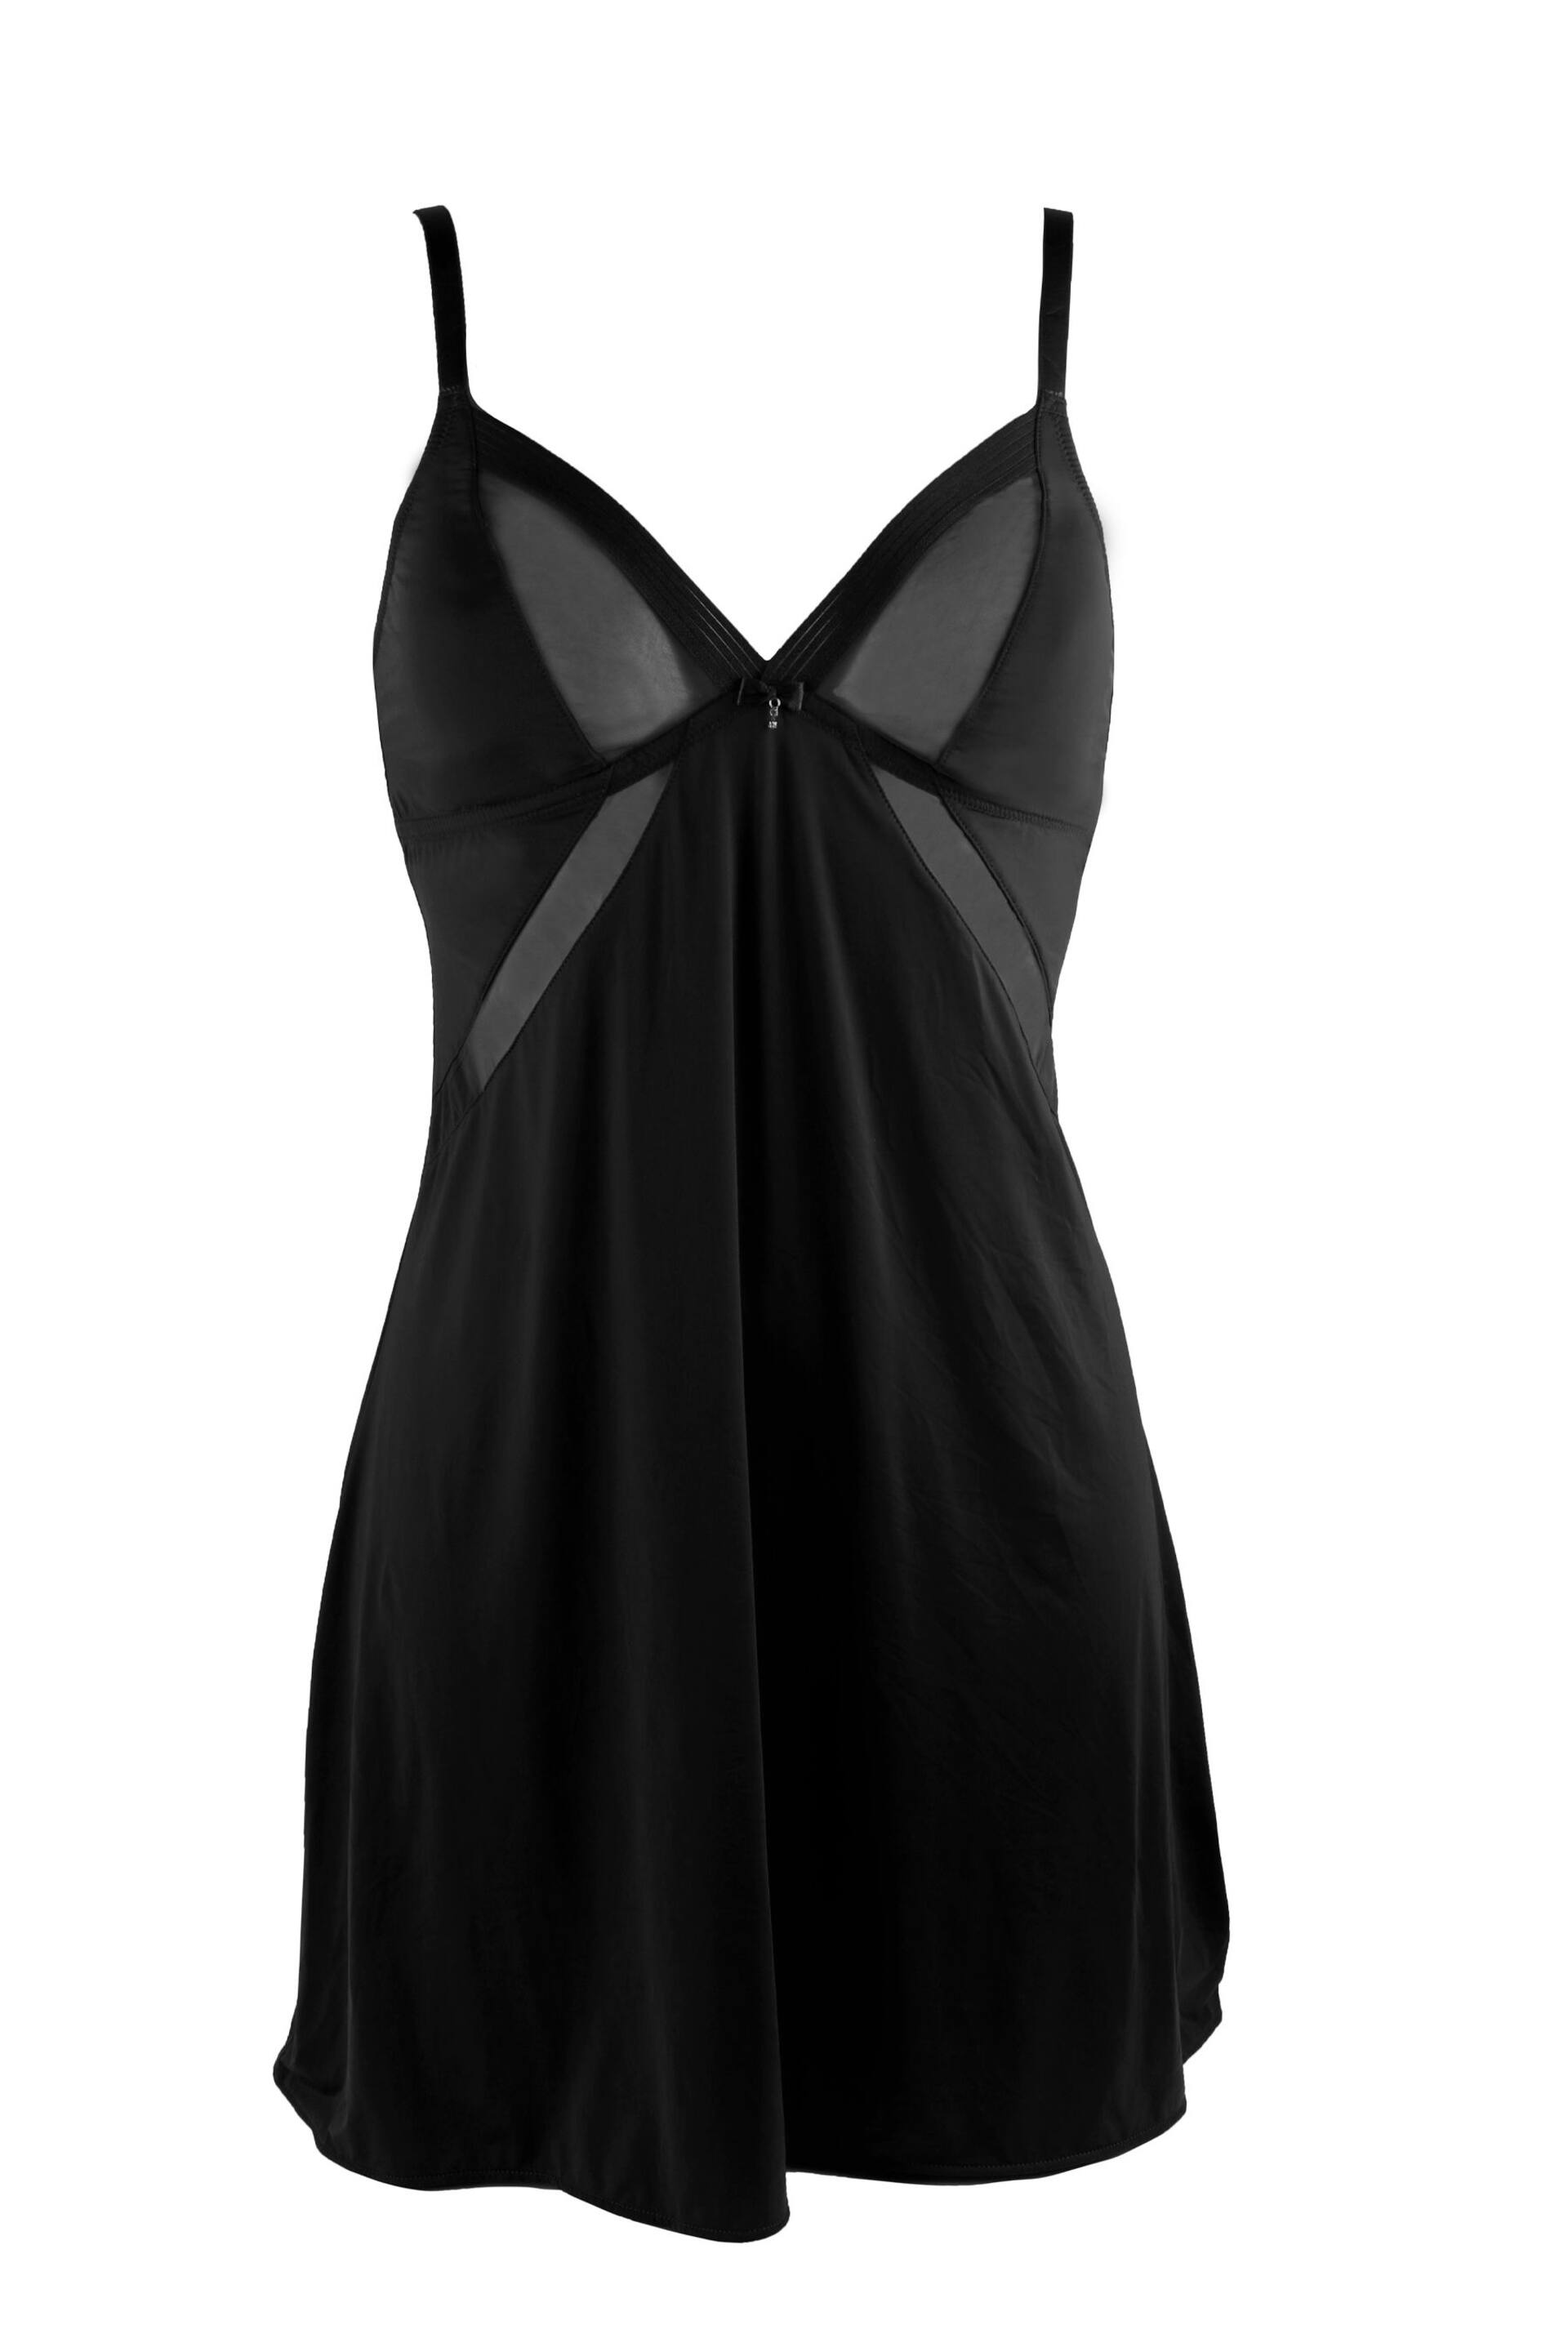 Pour Moi Black Viva Luxe Chemise - Image 2 of 3